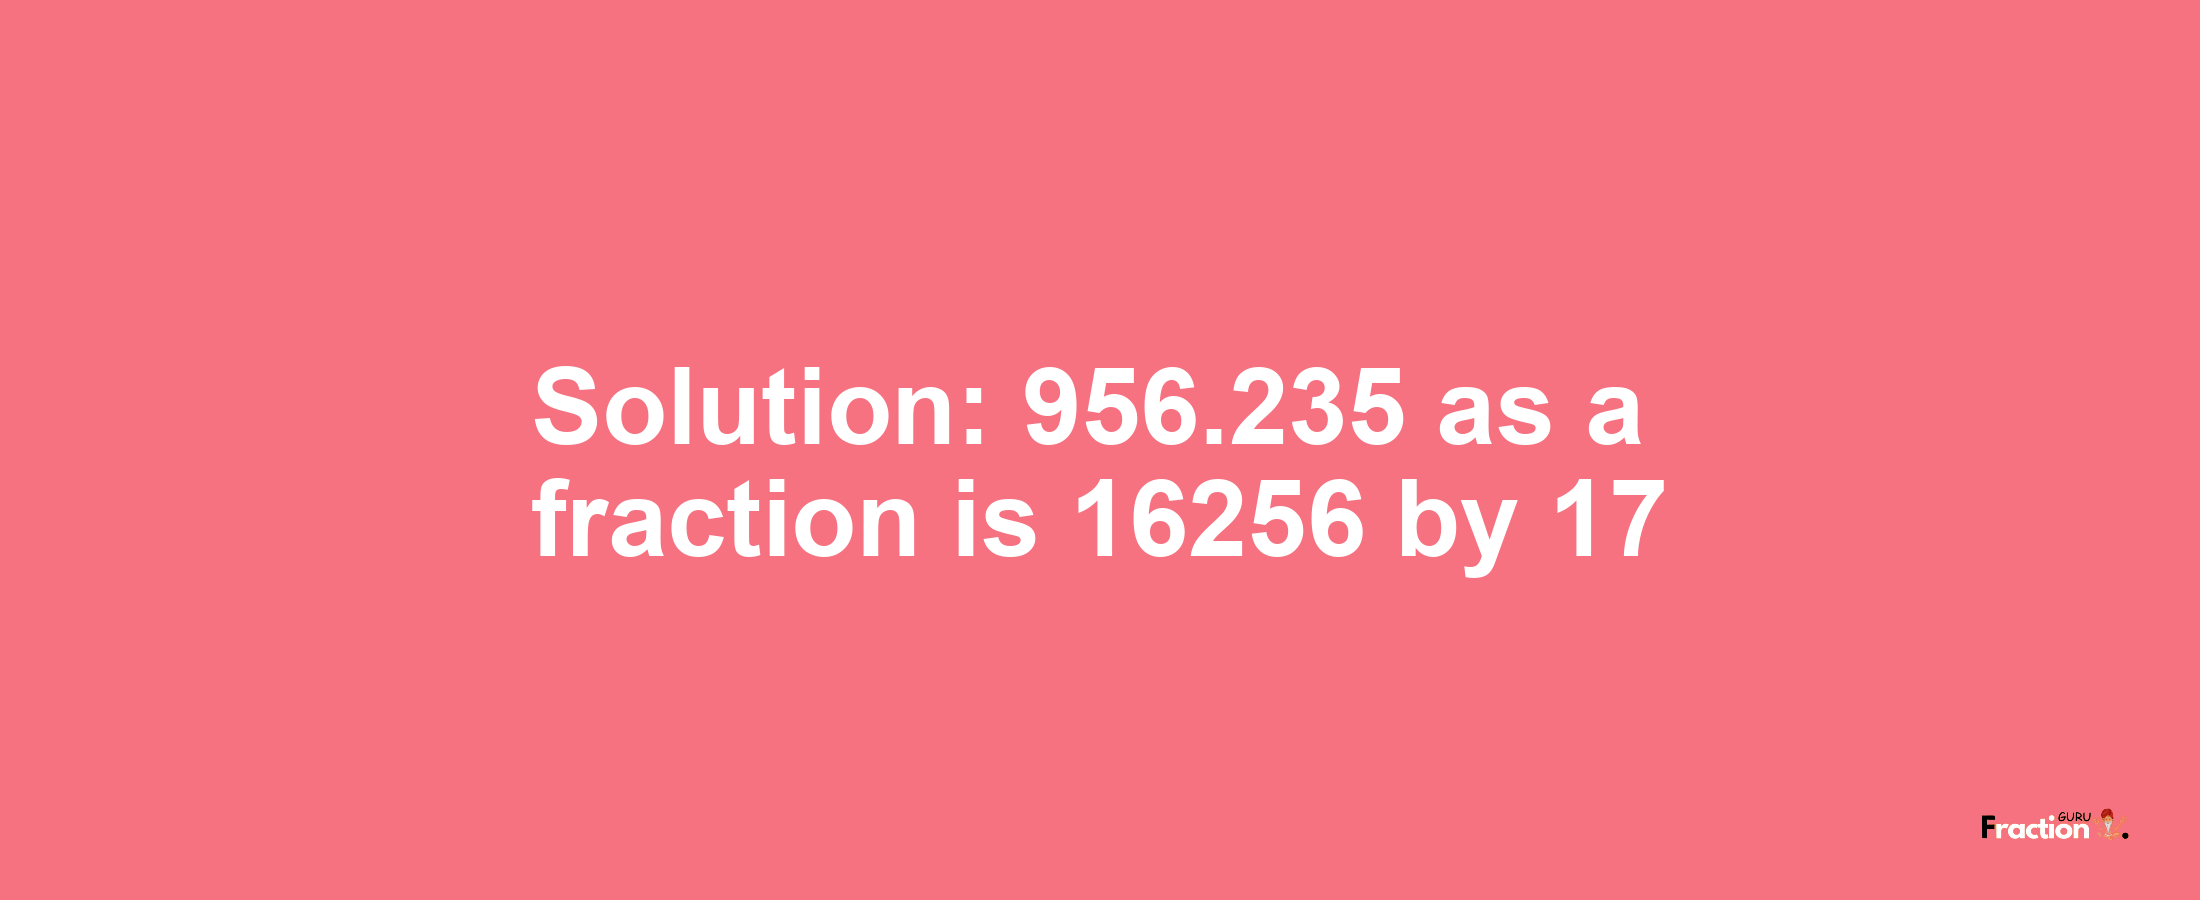 Solution:956.235 as a fraction is 16256/17